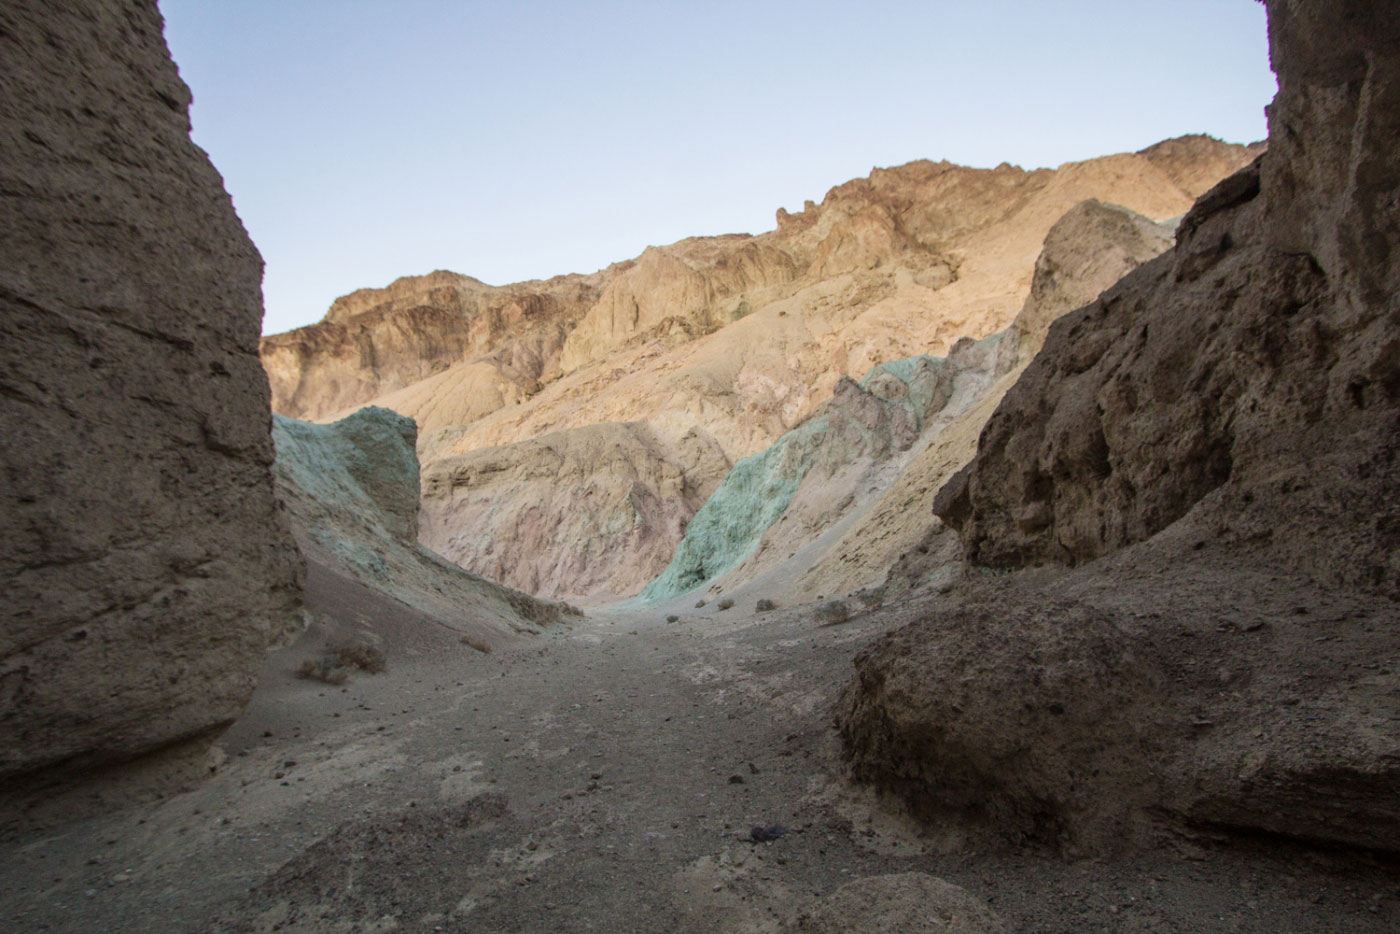 Hike Desolation Canyon in Death Valley National Park, California - Stav is Lost